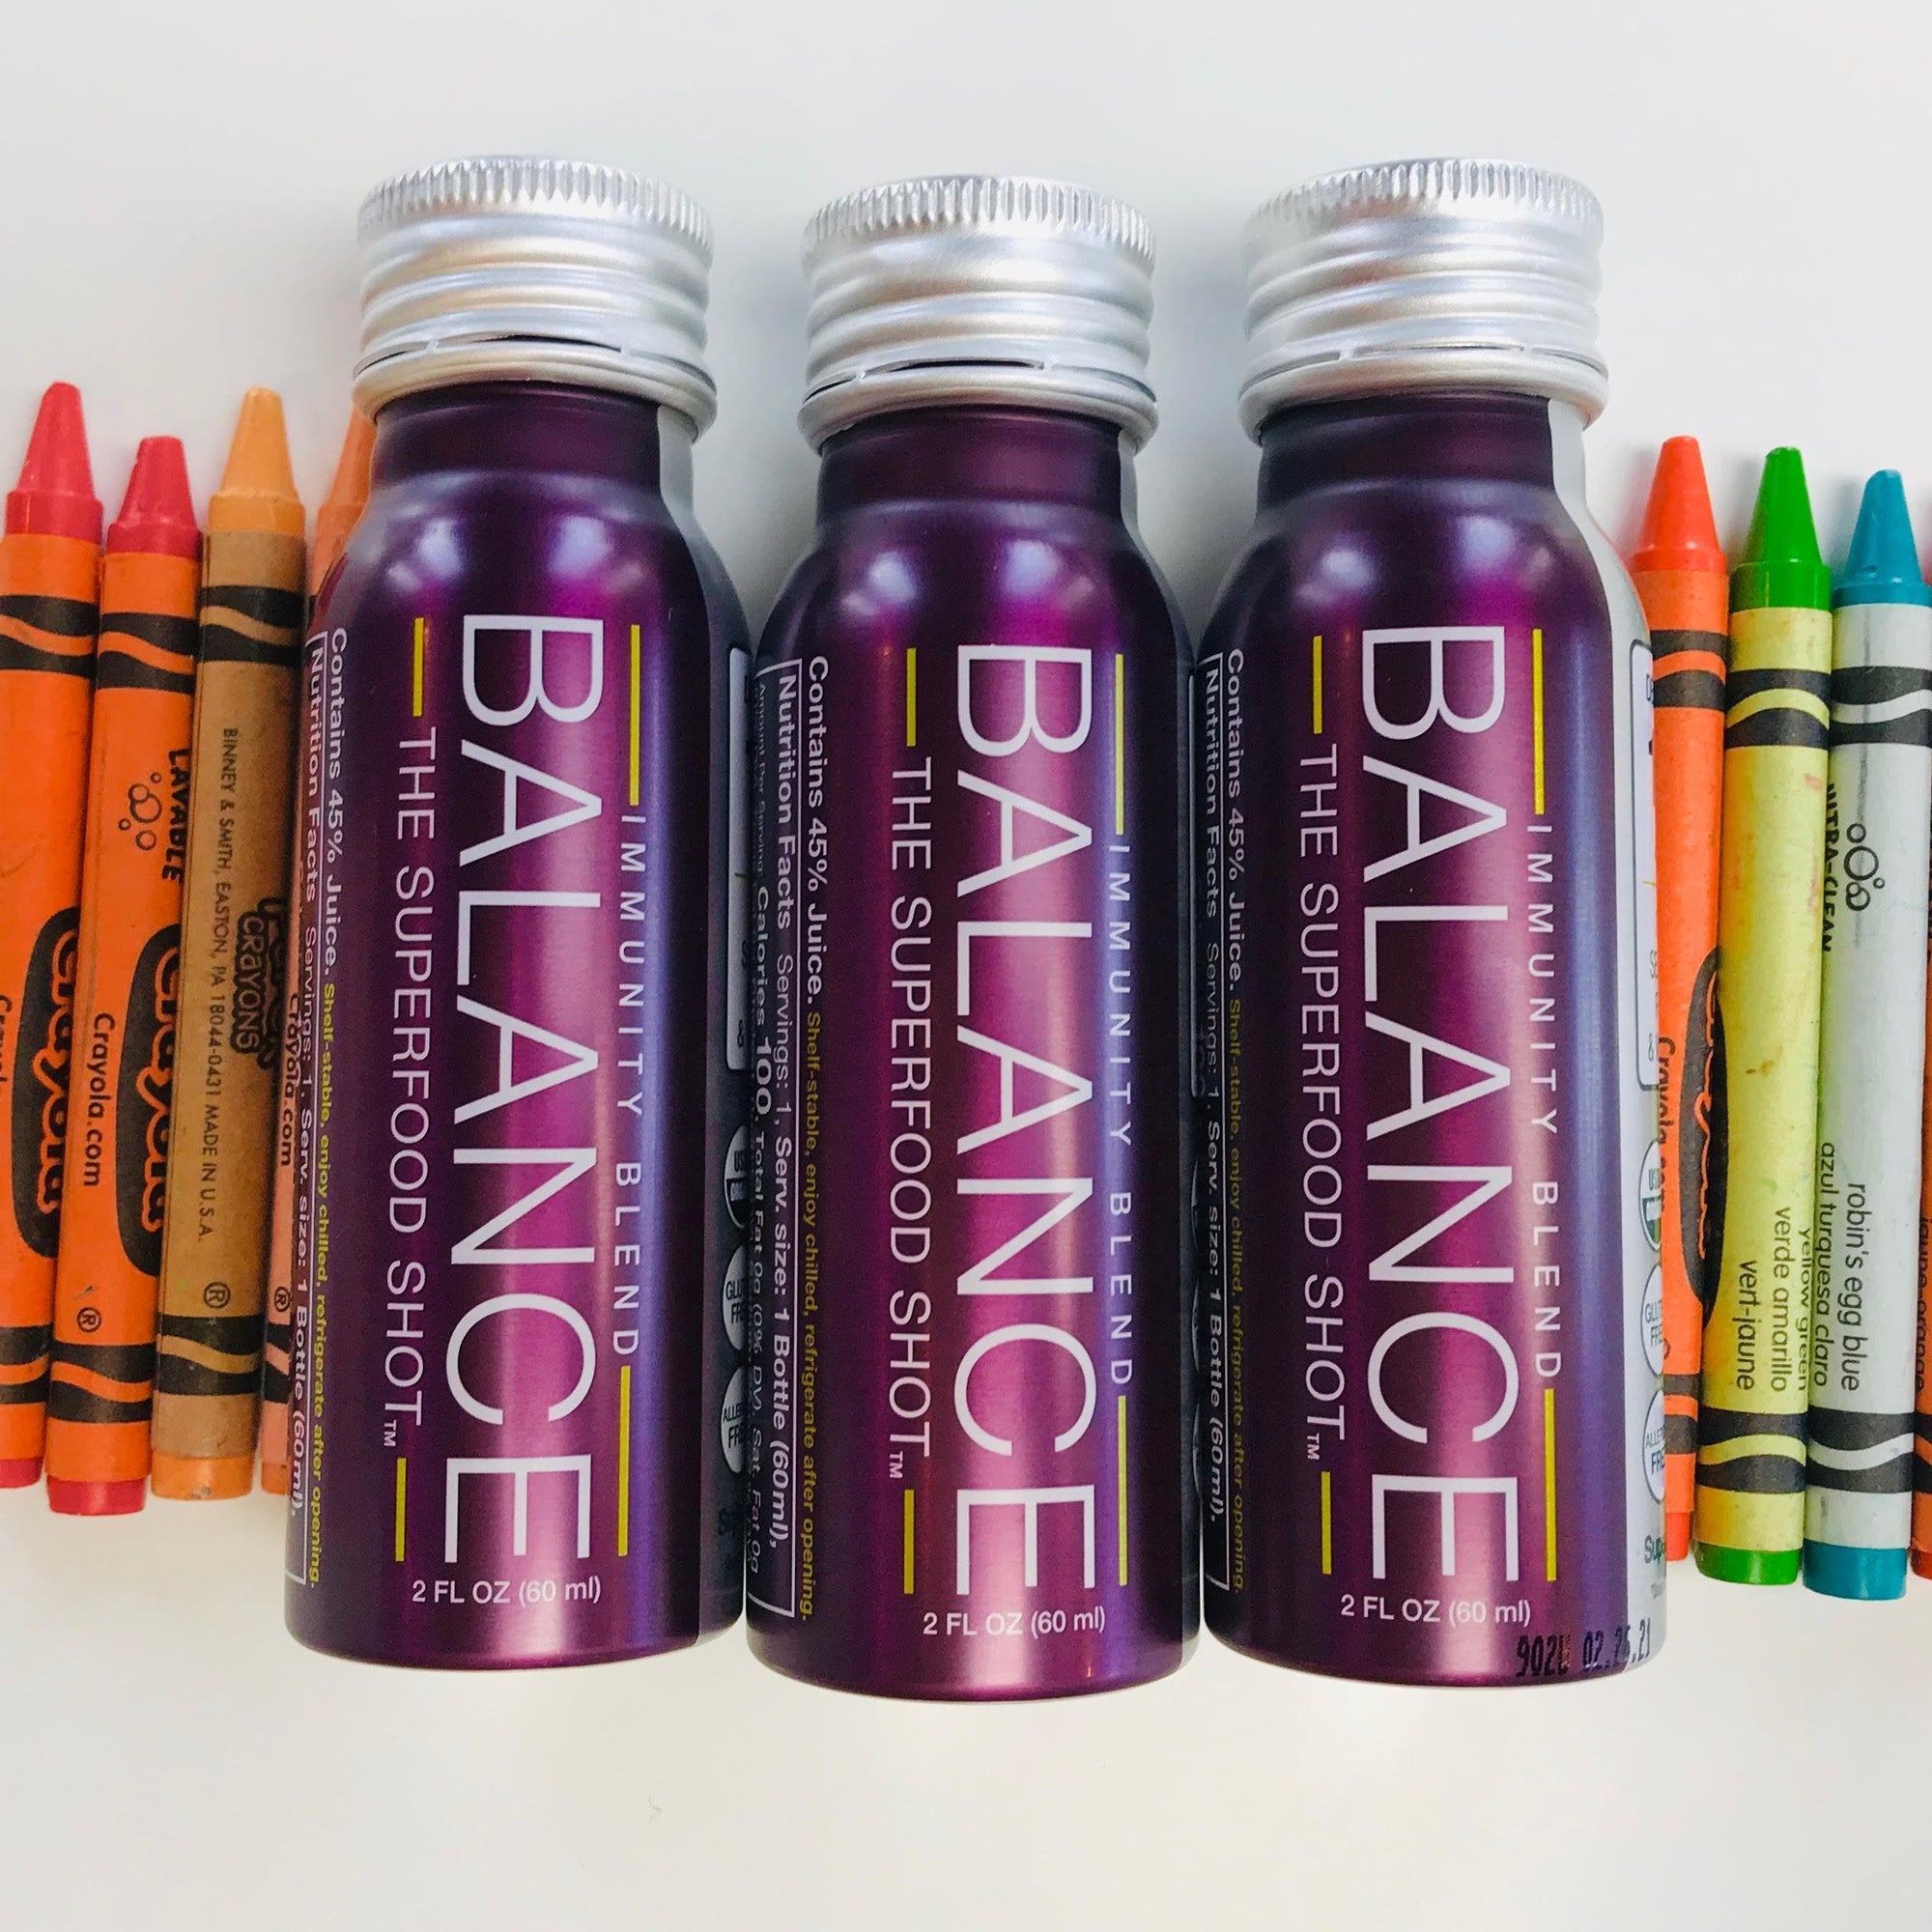 Balance the Superfood Shot Makes Going Back to School a Breeze